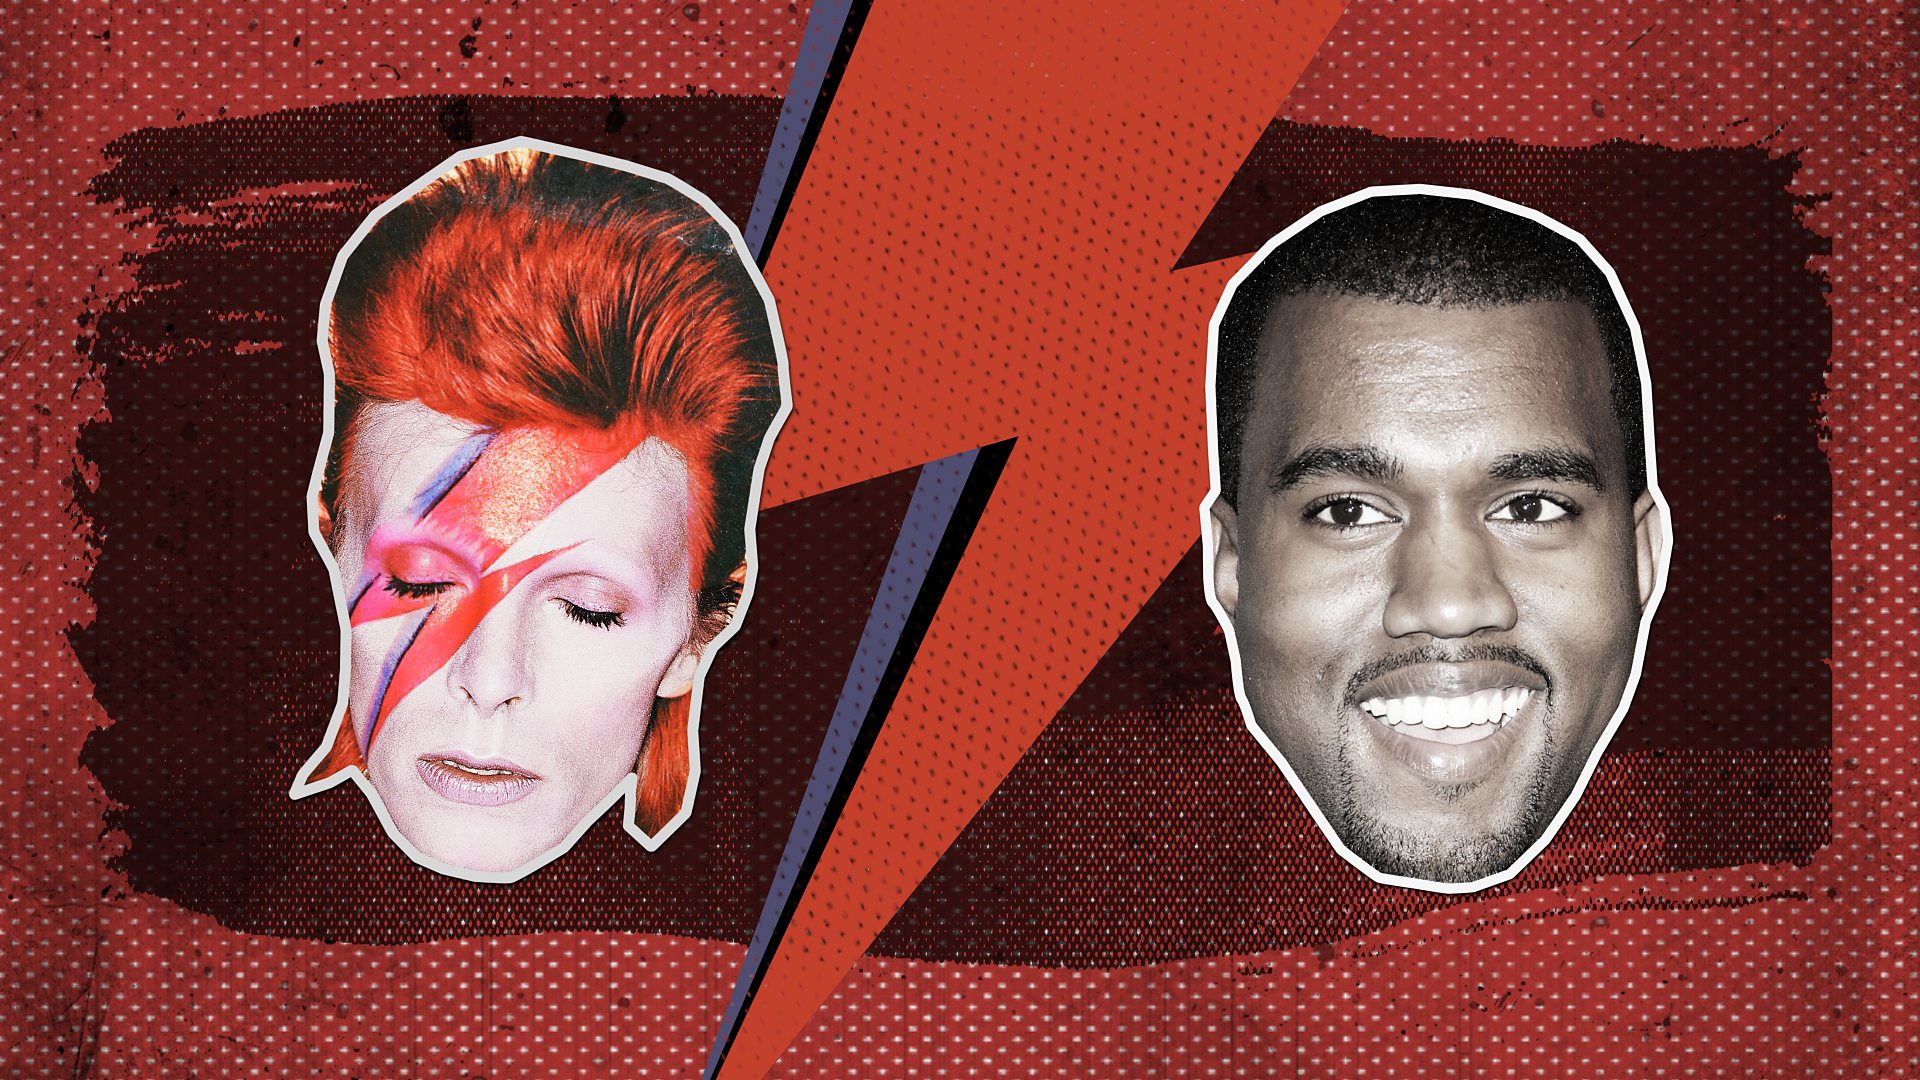 David Bowie and Kanye West